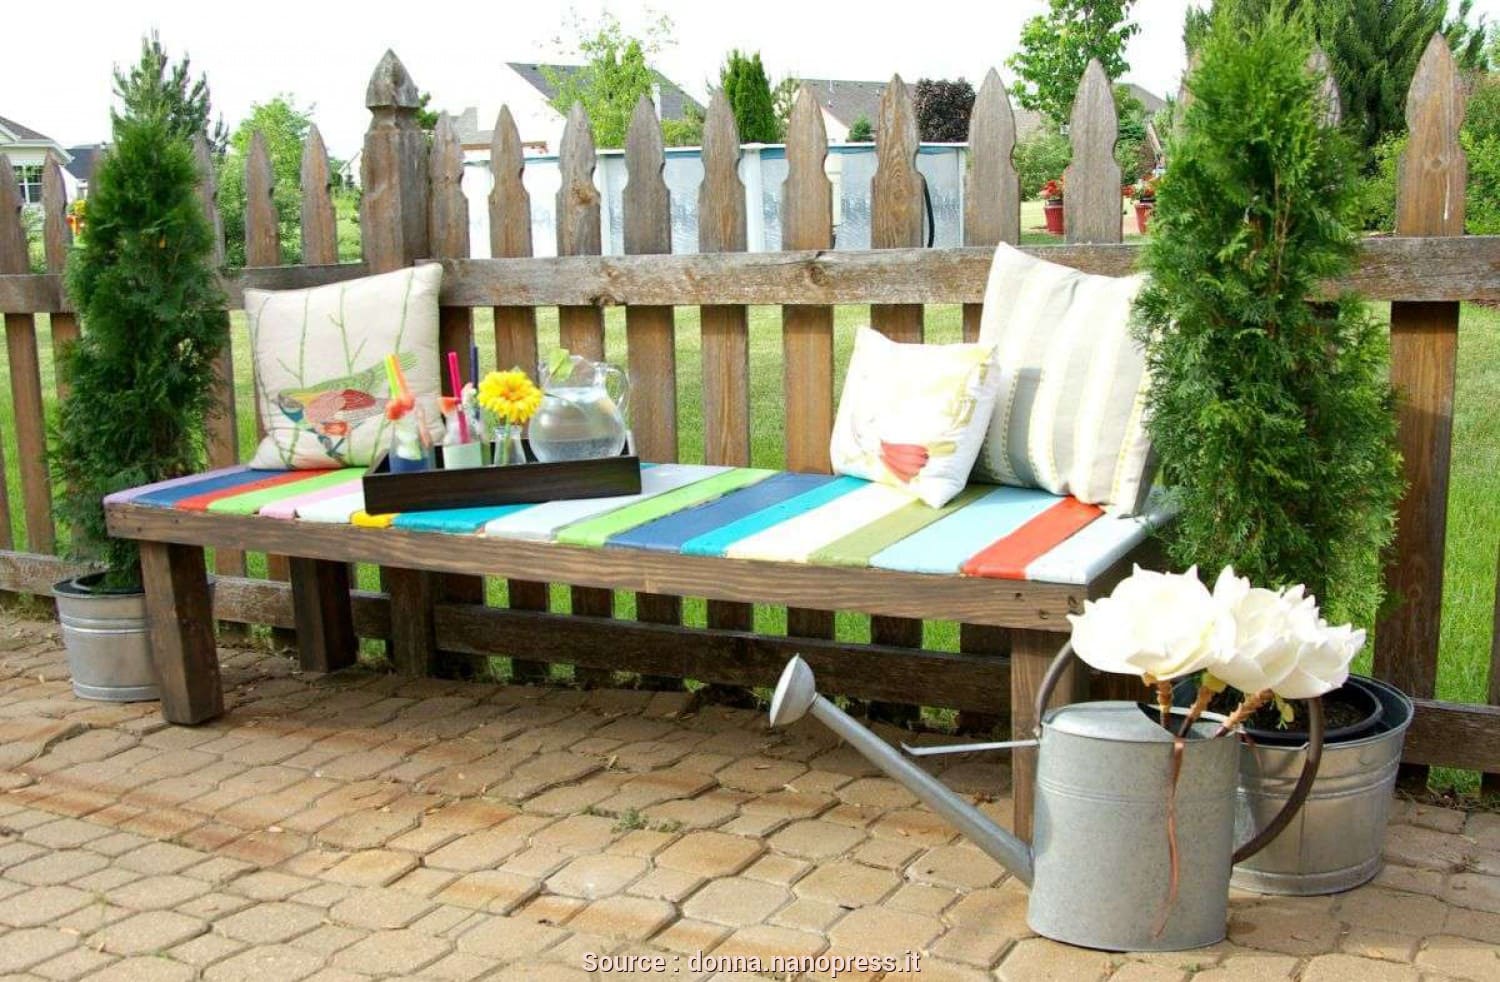 20 ideas for landscaping gardens and backyards with pallets - 167